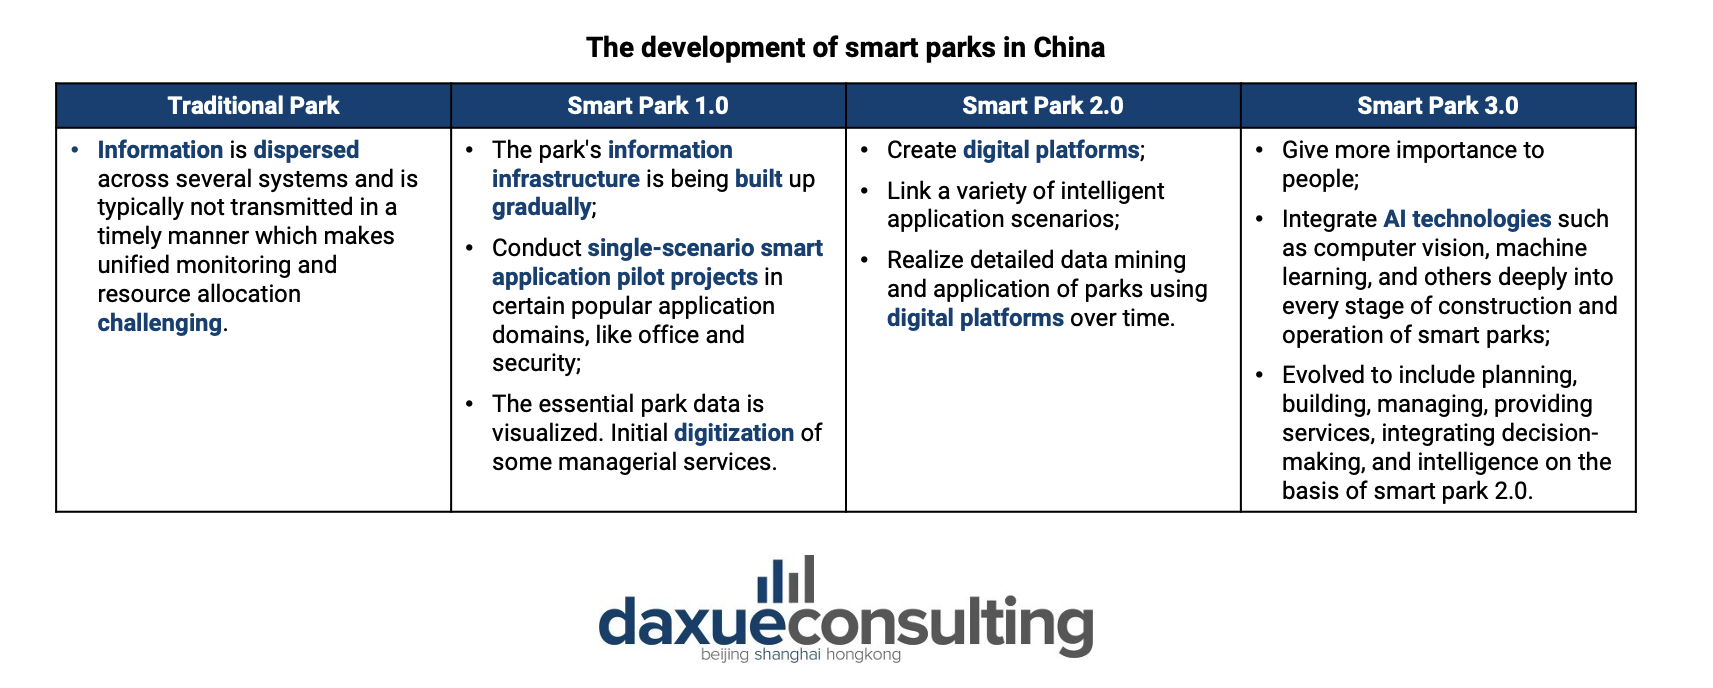 The development of smart parks in China